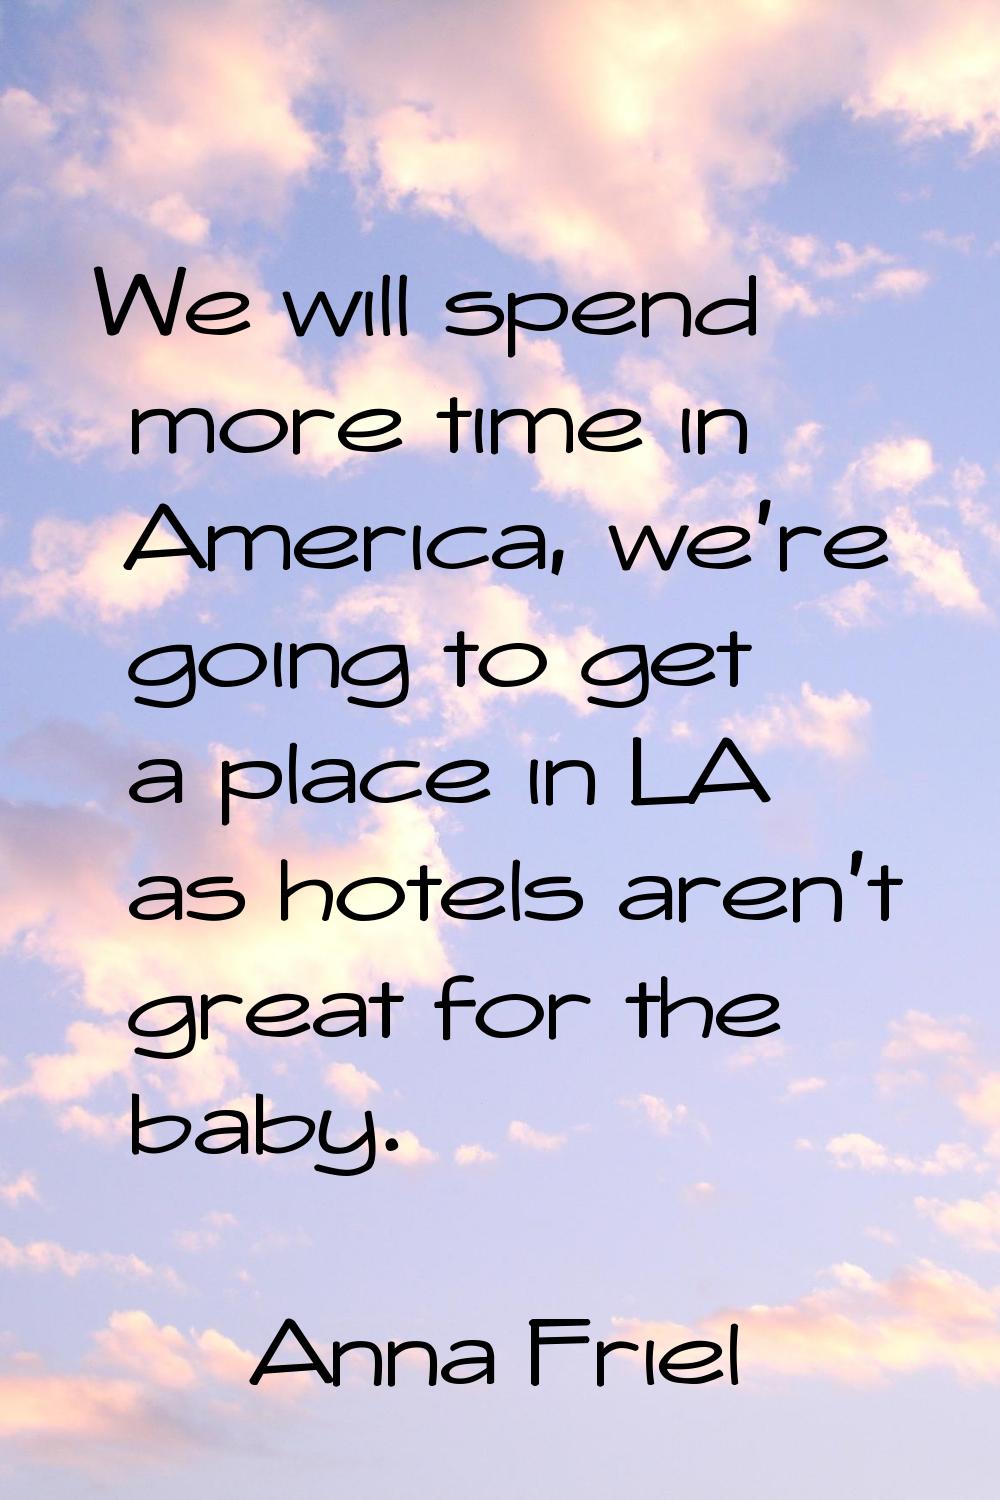 We will spend more time in America, we're going to get a place in LA as hotels aren't great for the